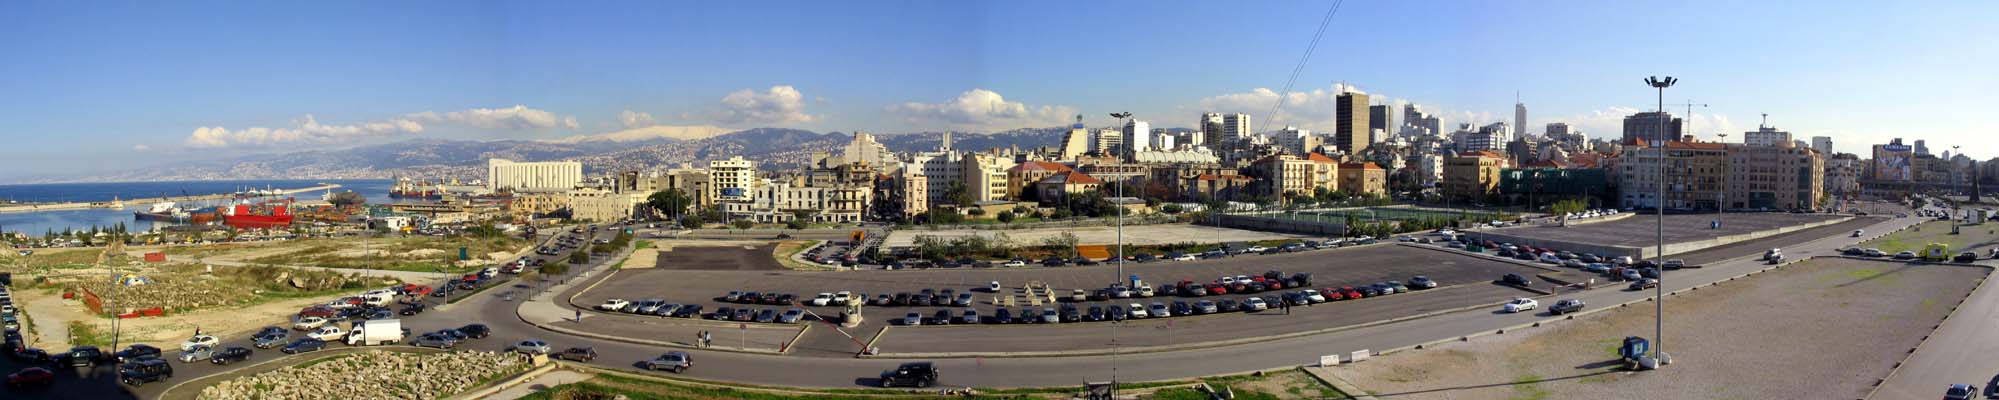  Beirut - Panoramic view of Martyr's Square looking east with Beirut's harbor on the left and the ring road on the right